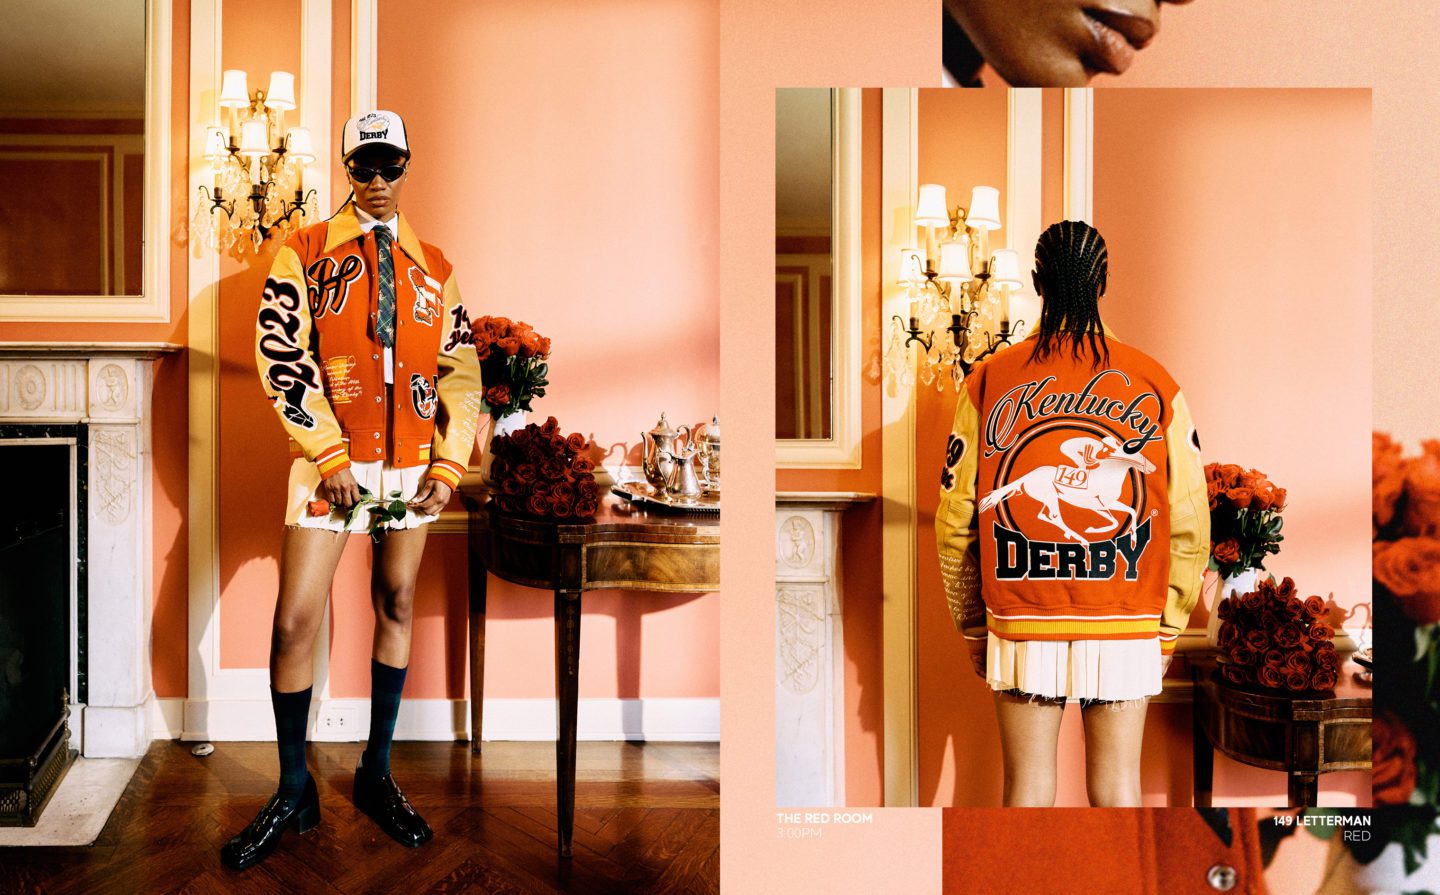 Black Heritage Fashion: Homme+Femme Launches Official Kentucky Derby Collection In Second Partnership With Churchill Downs